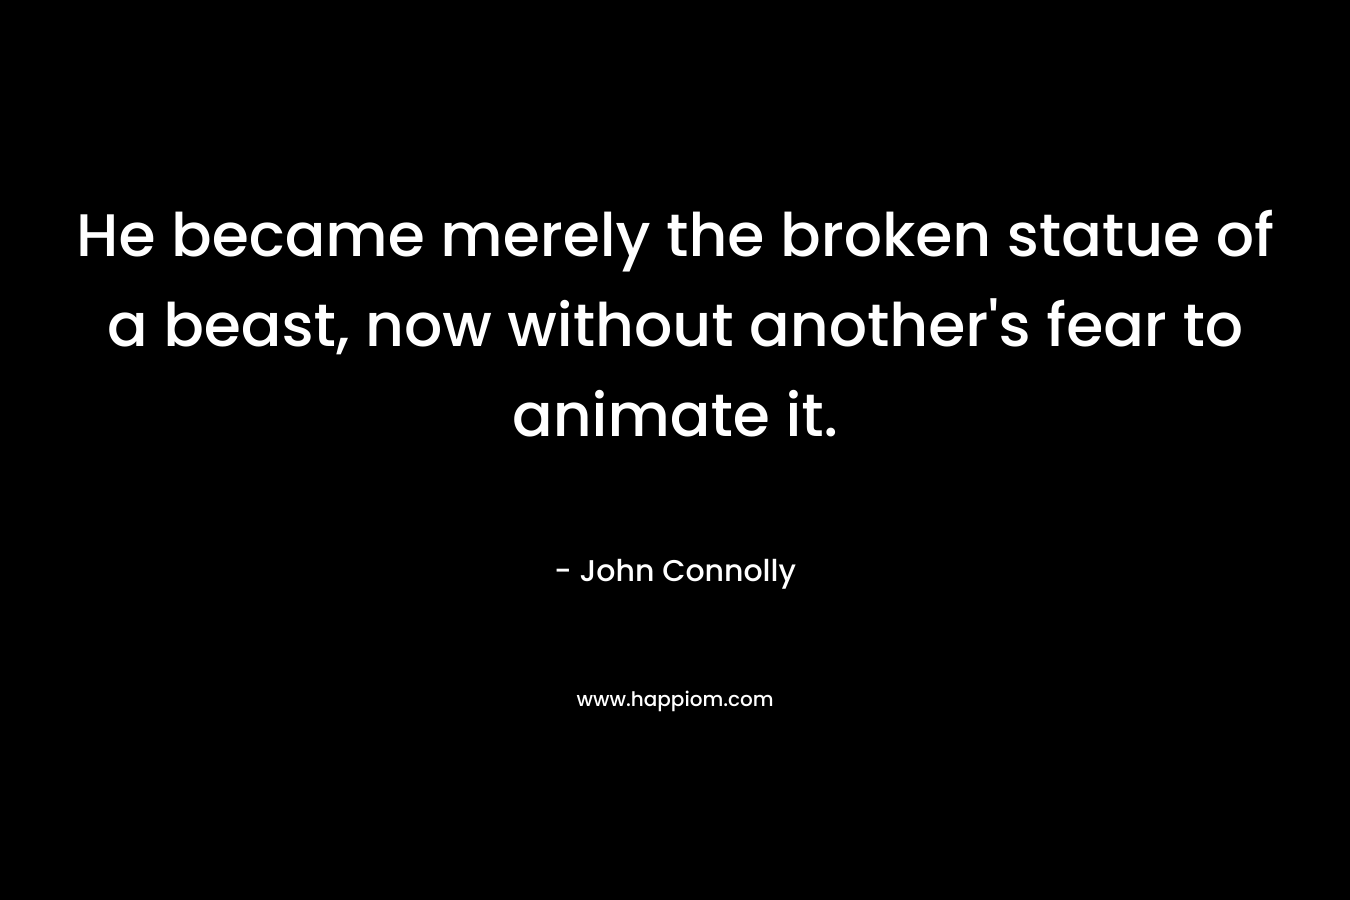 He became merely the broken statue of a beast, now without another’s fear to animate it. – John Connolly